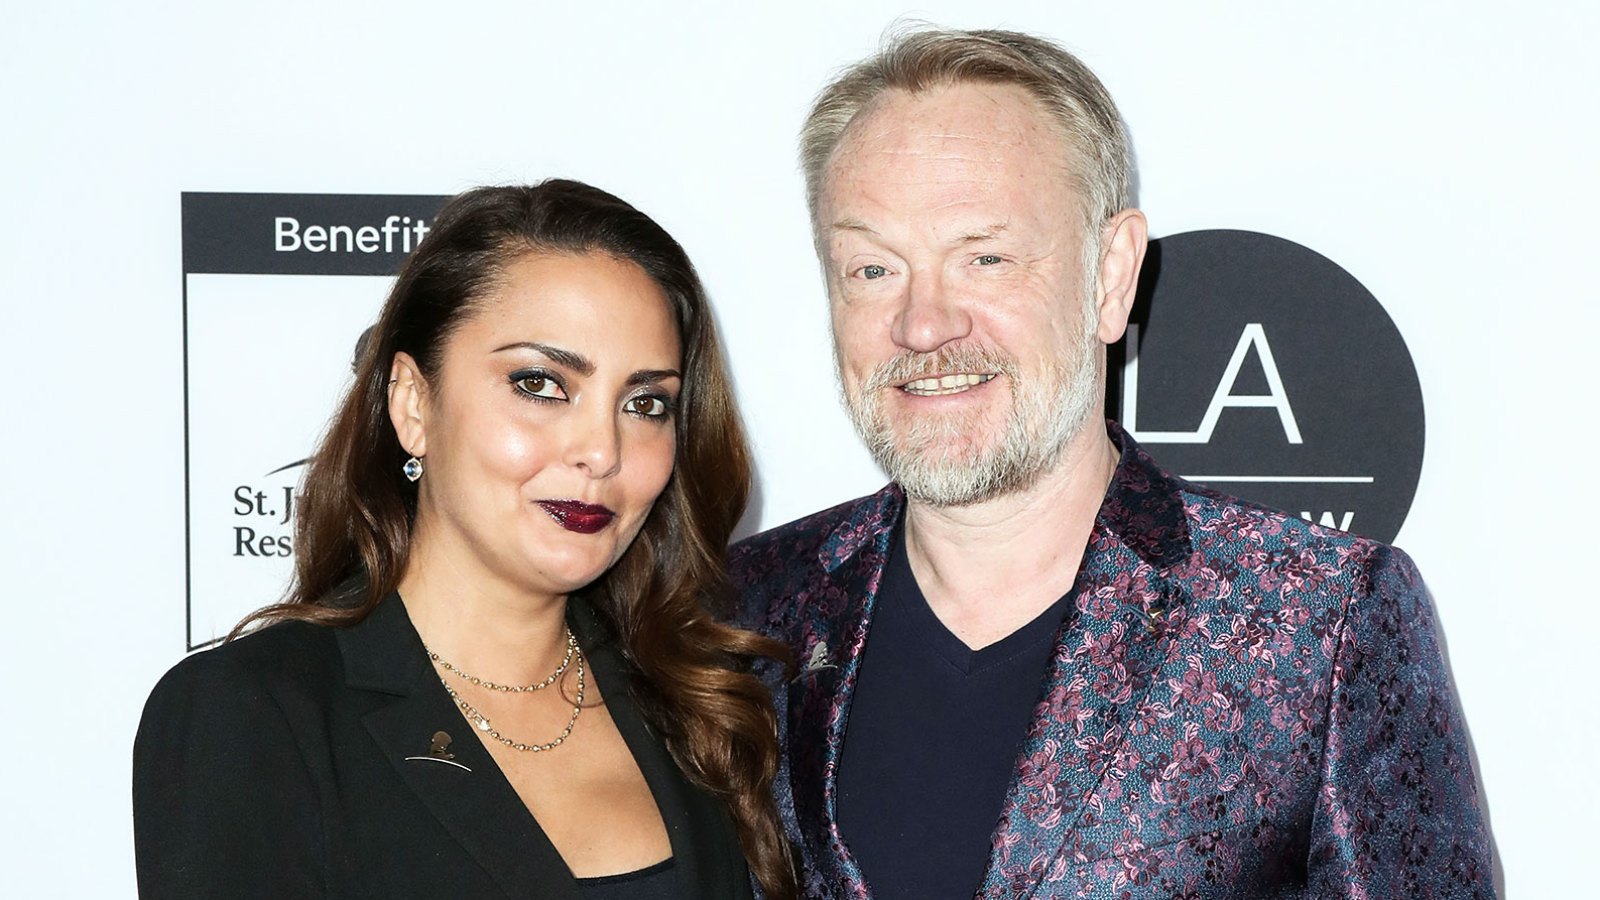 Allegra Riggio and Jared Harris attend the Los Angeles Art Show Opening Night Gala The Crowns Jared Harris Confirms Show Never Planned to Cover Prince Harry and Meghan Markle